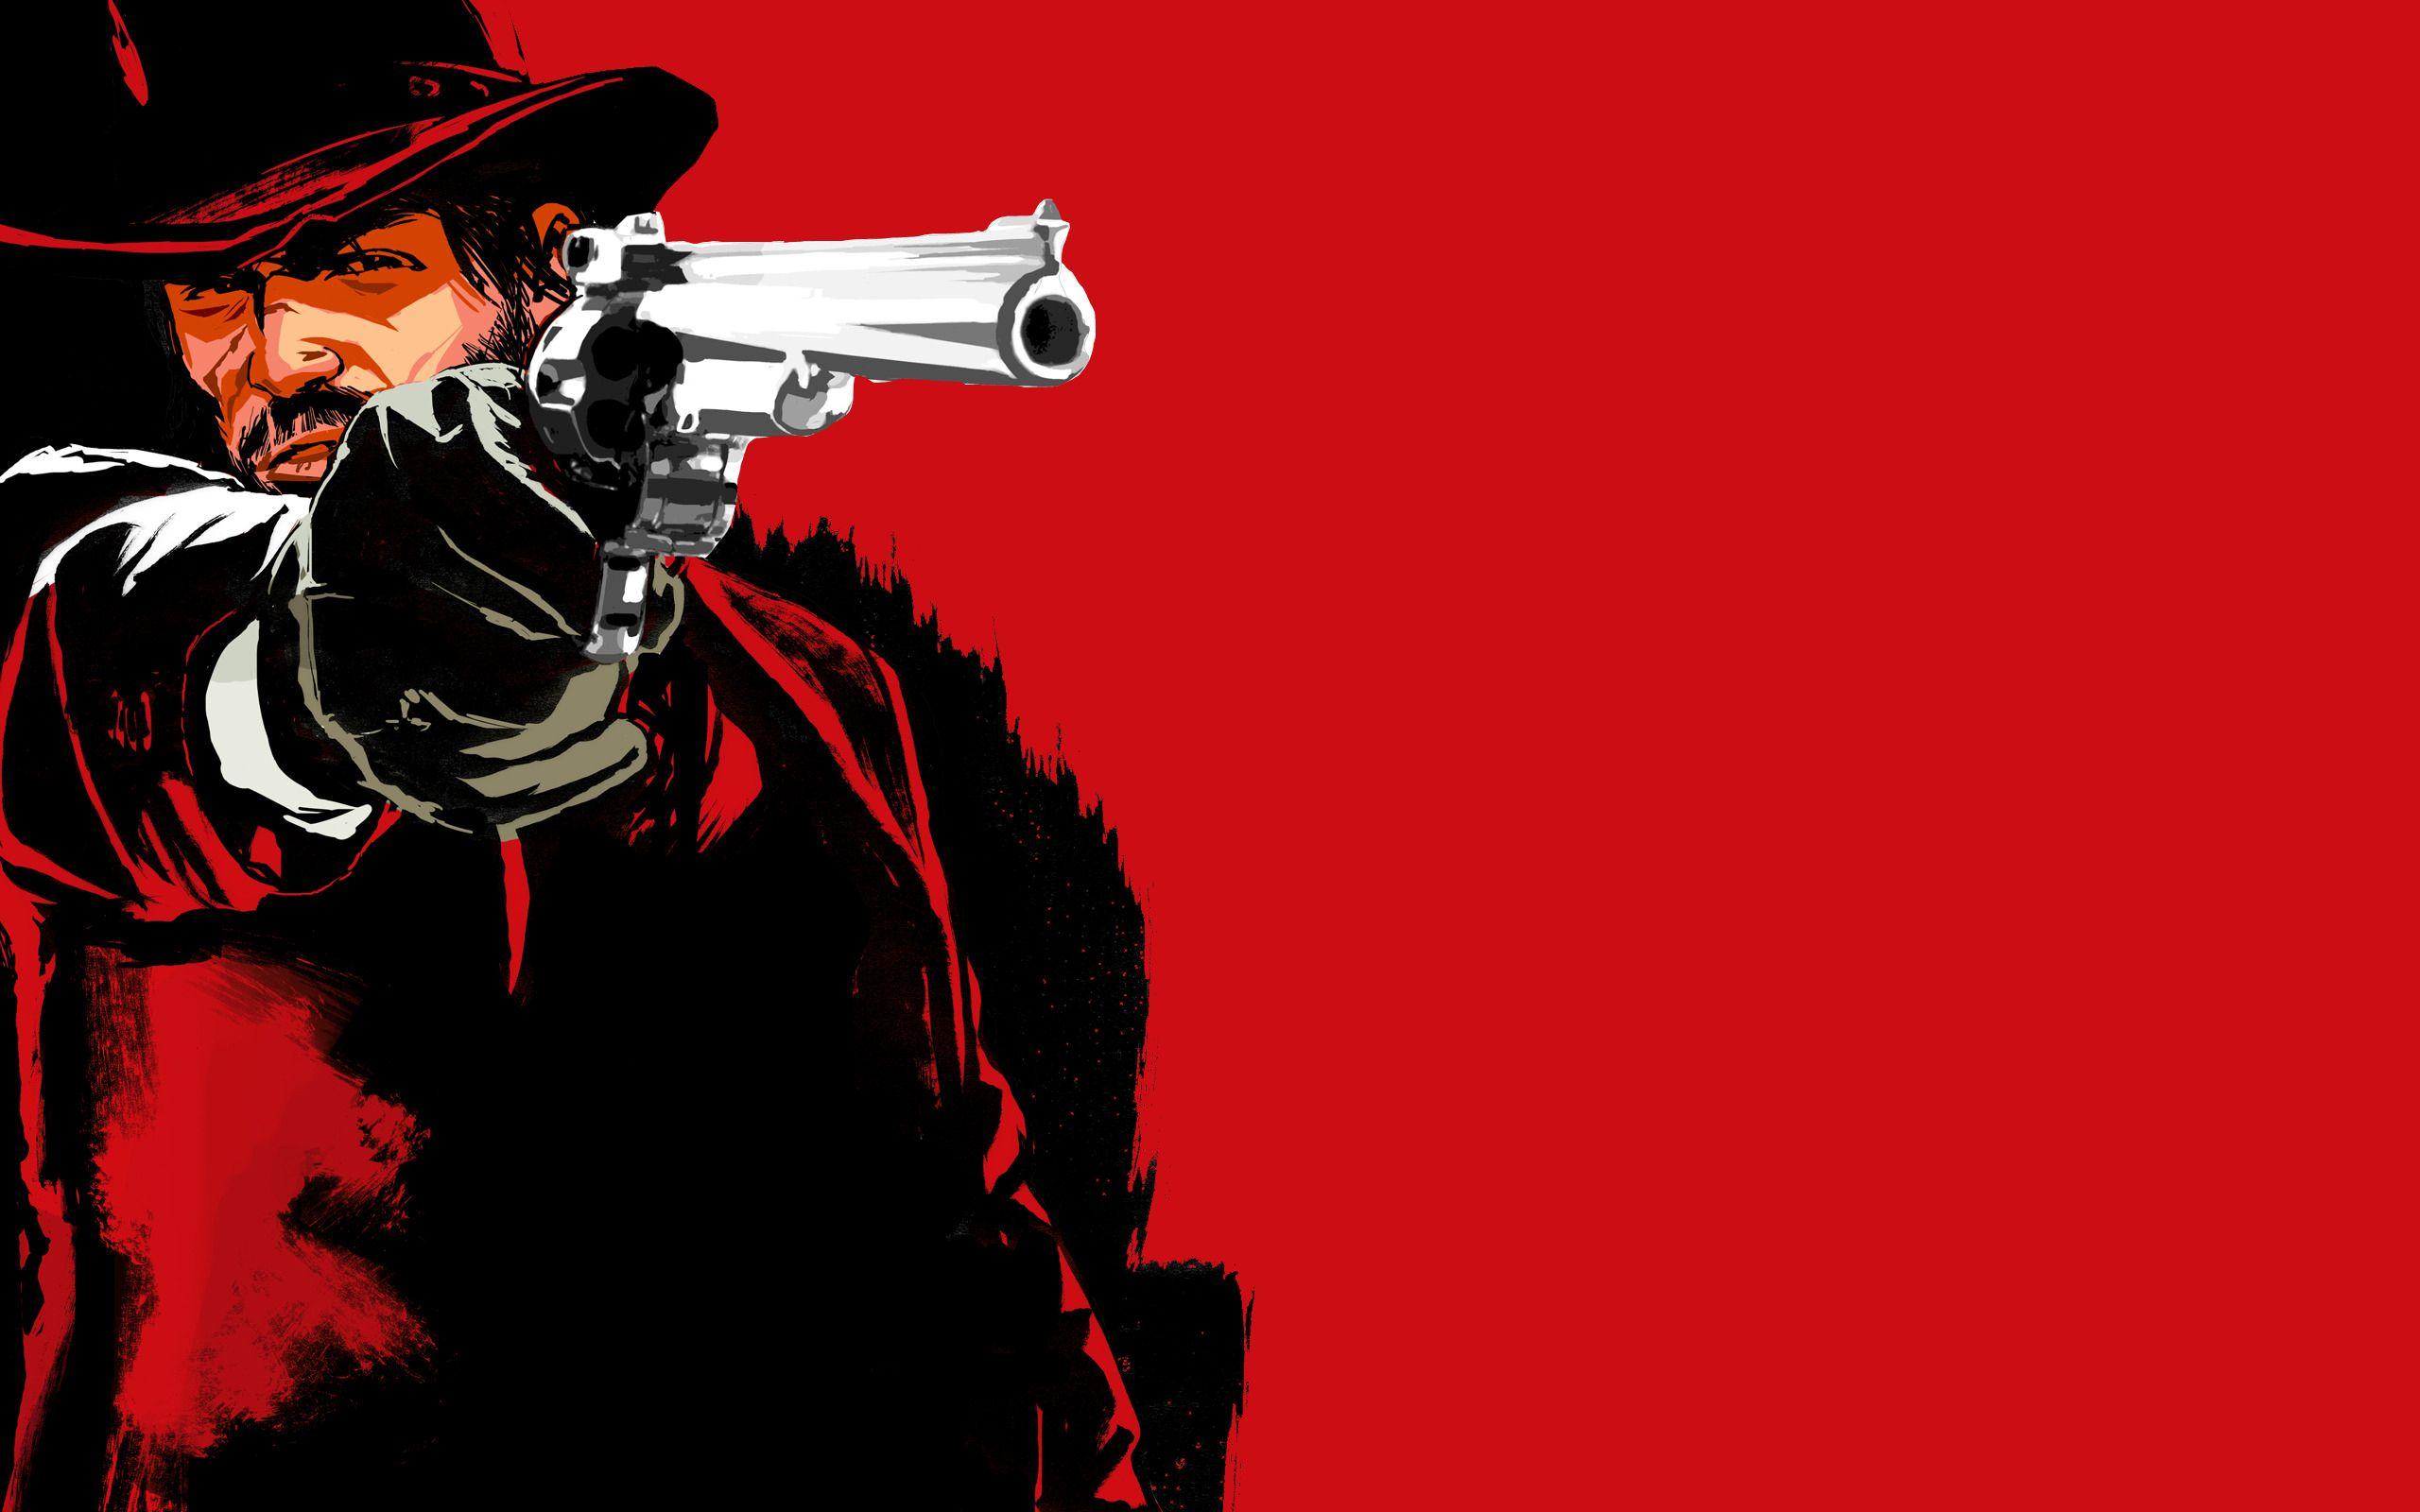 Download the Red Dead Revolver Wallpaper, Red Dead Revolver iPhone